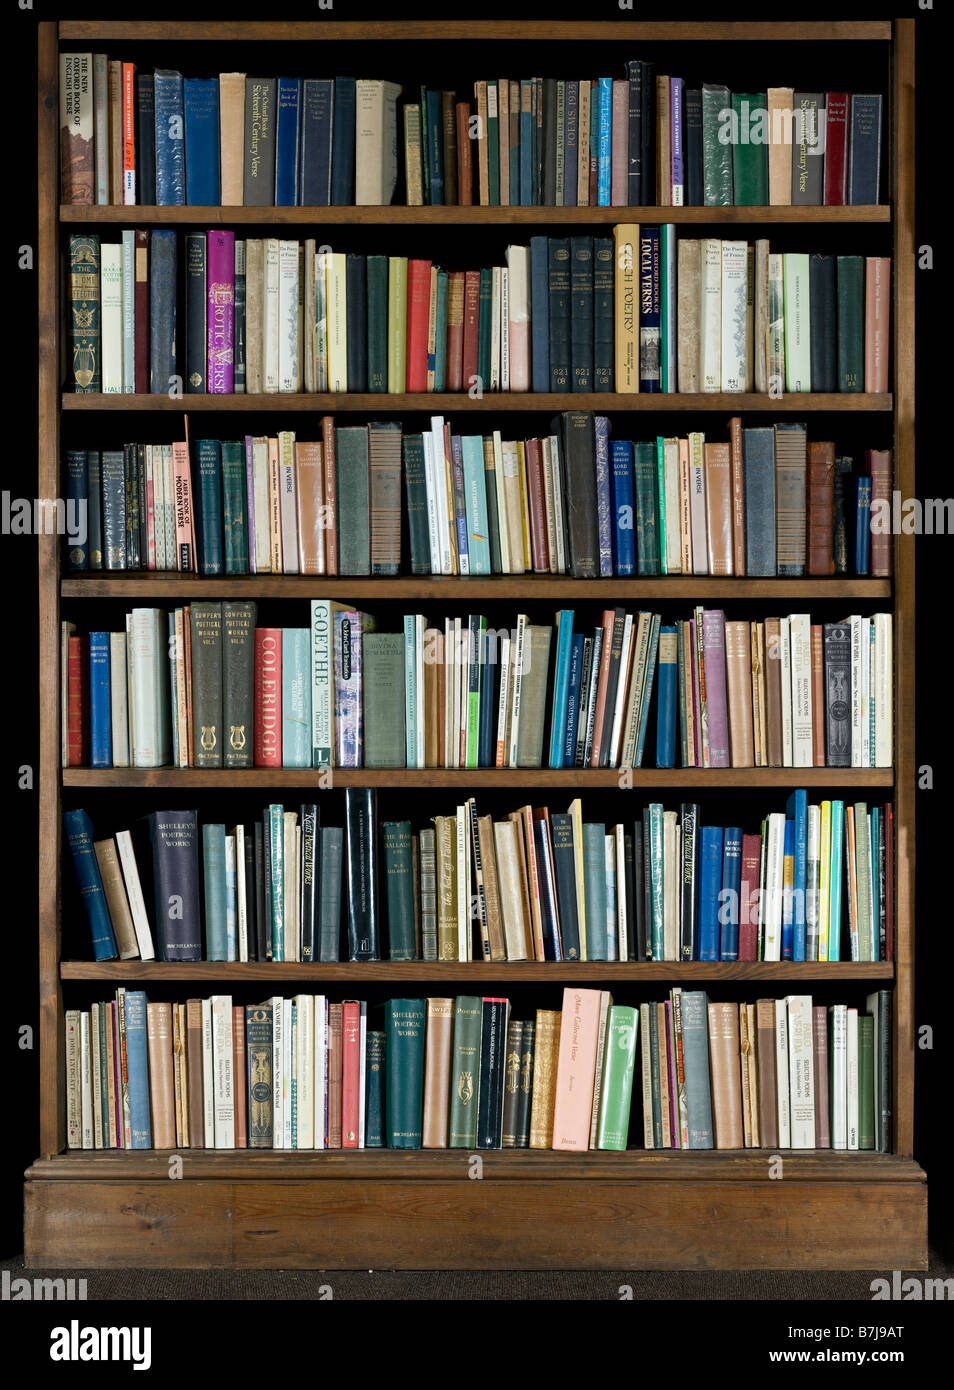 High Resolution Image Of Books On A Bookshelf On A Black Background Stock Photo